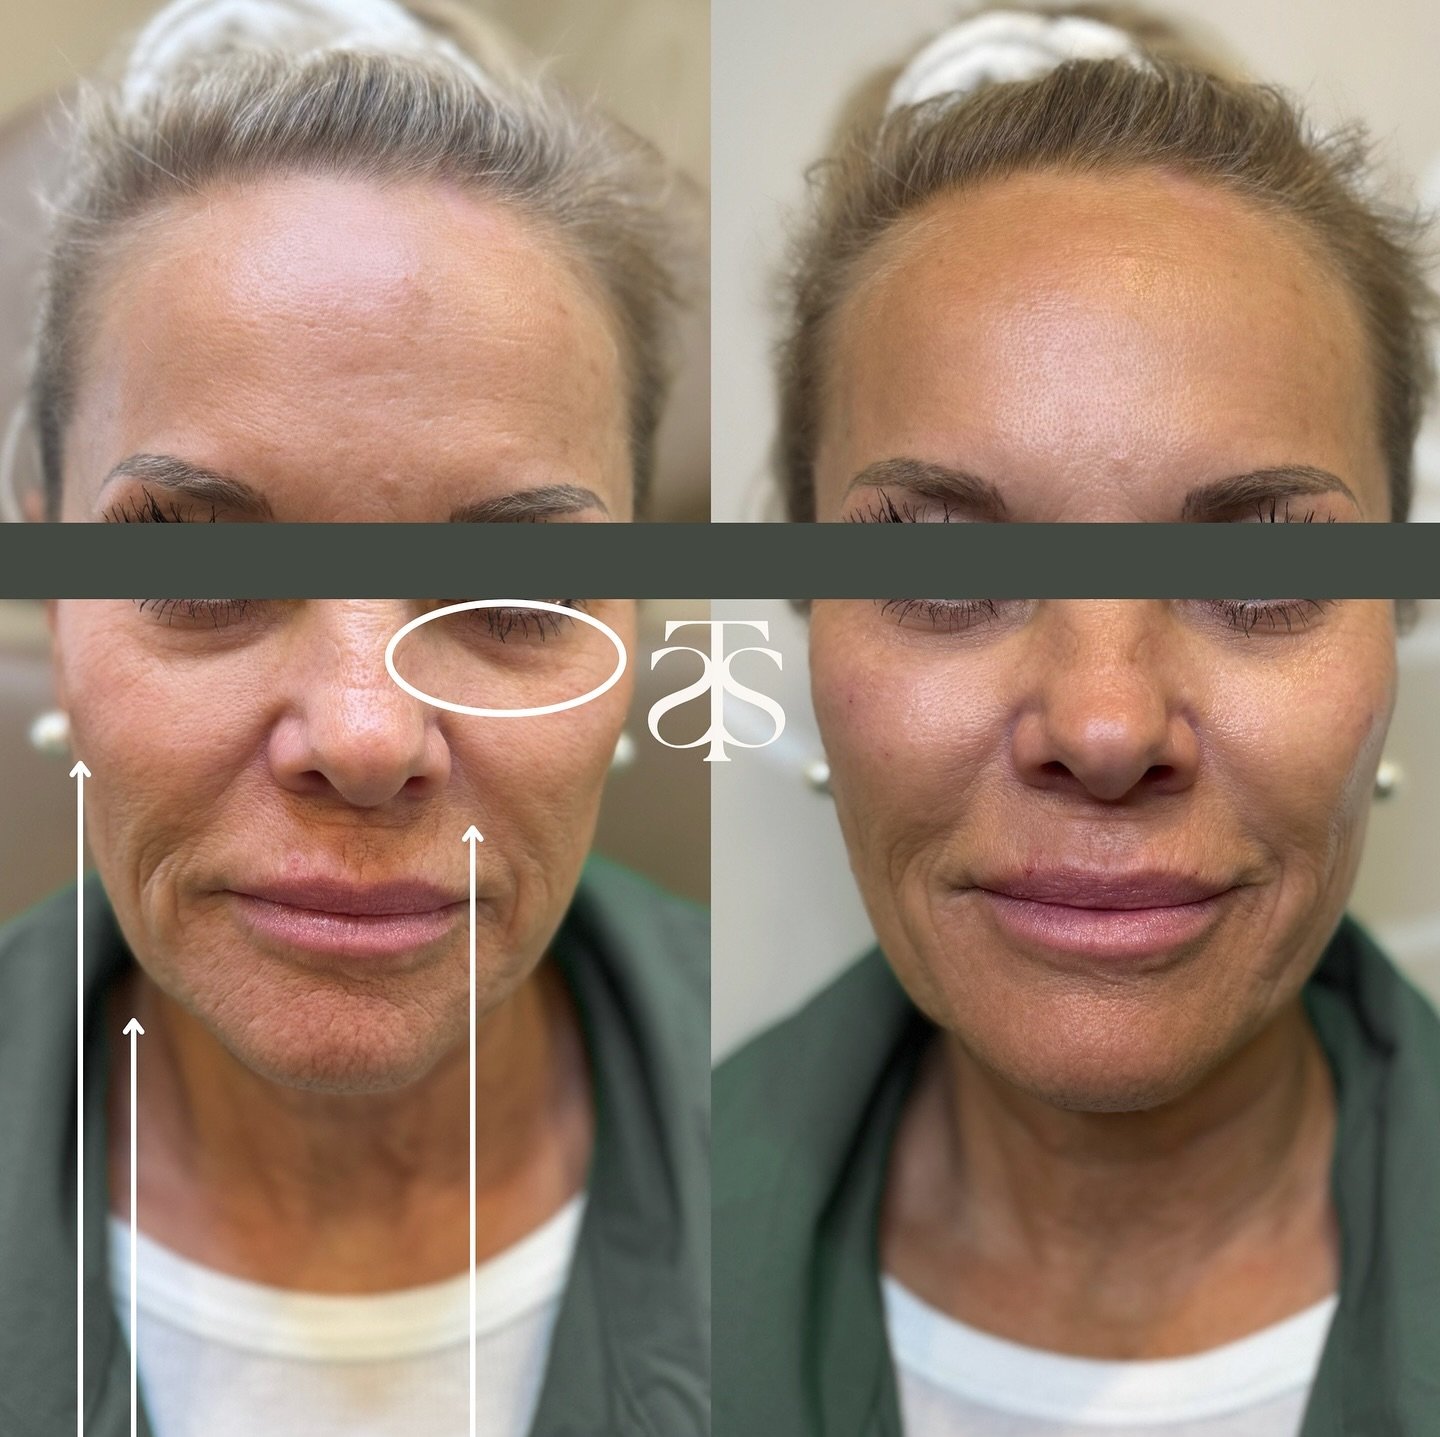 💉Cheek filler checklist:

✔️Volume restoration 
✔️Soften under eye hallows 
✔️Lift jowels
✔️Lift and diminish nasolabial folds (smile lines)
✔️A beautiful and subtle enhancement for a more youthful appearance ￼